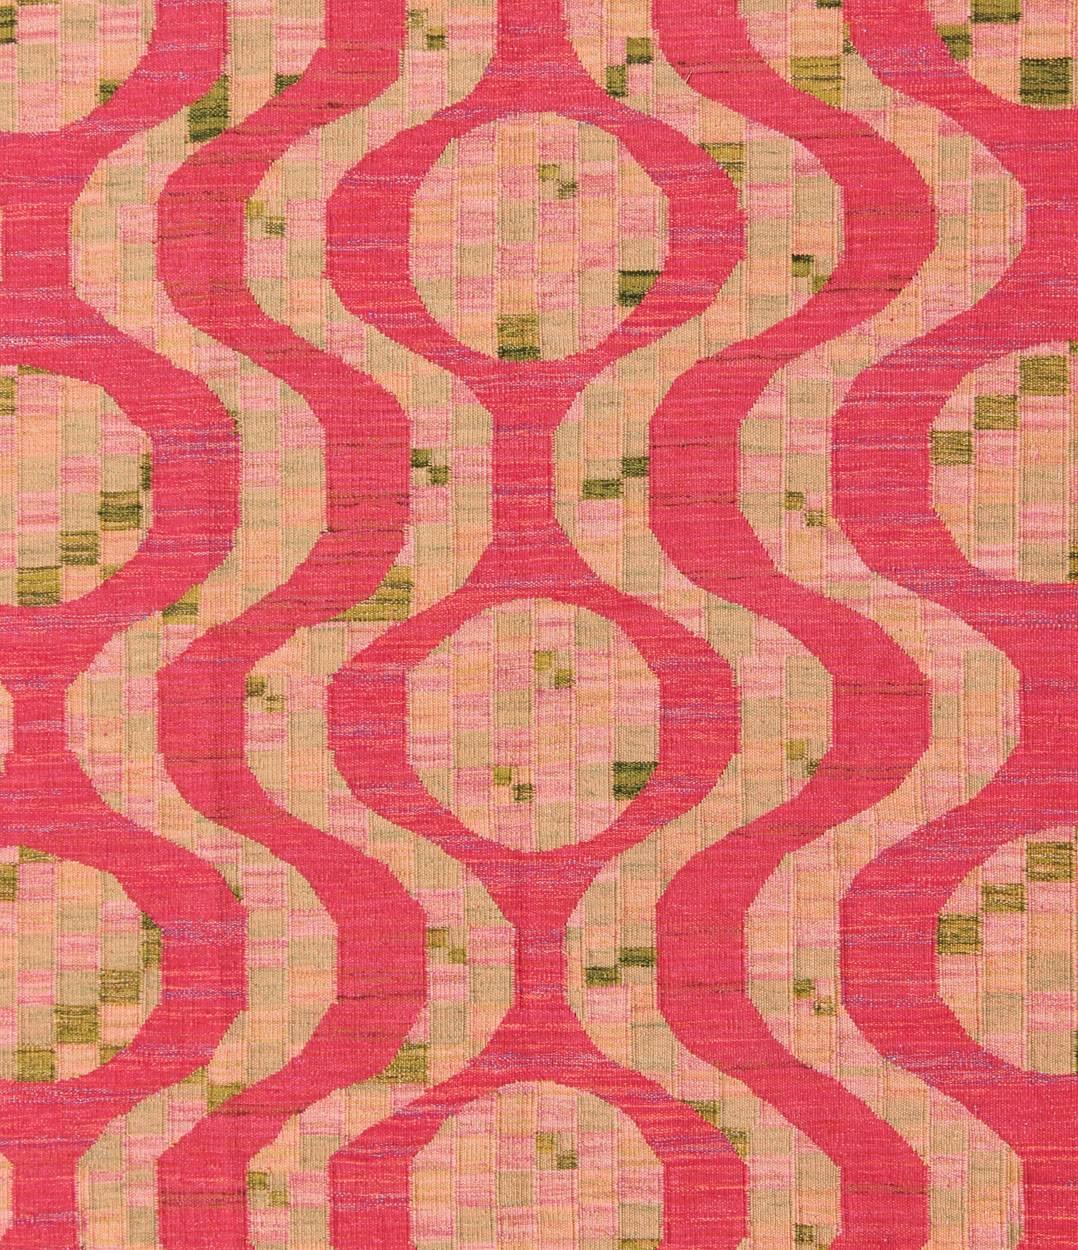 Scandinavian Design Flat-Weave Rug in Red, Salmon, Pink and Green.
This Scandinavian Flat-Weave patterned rug is inspired by the work of Swedish textile designers of the early to mid-20th Century. With a unique blend of historical and modern design,